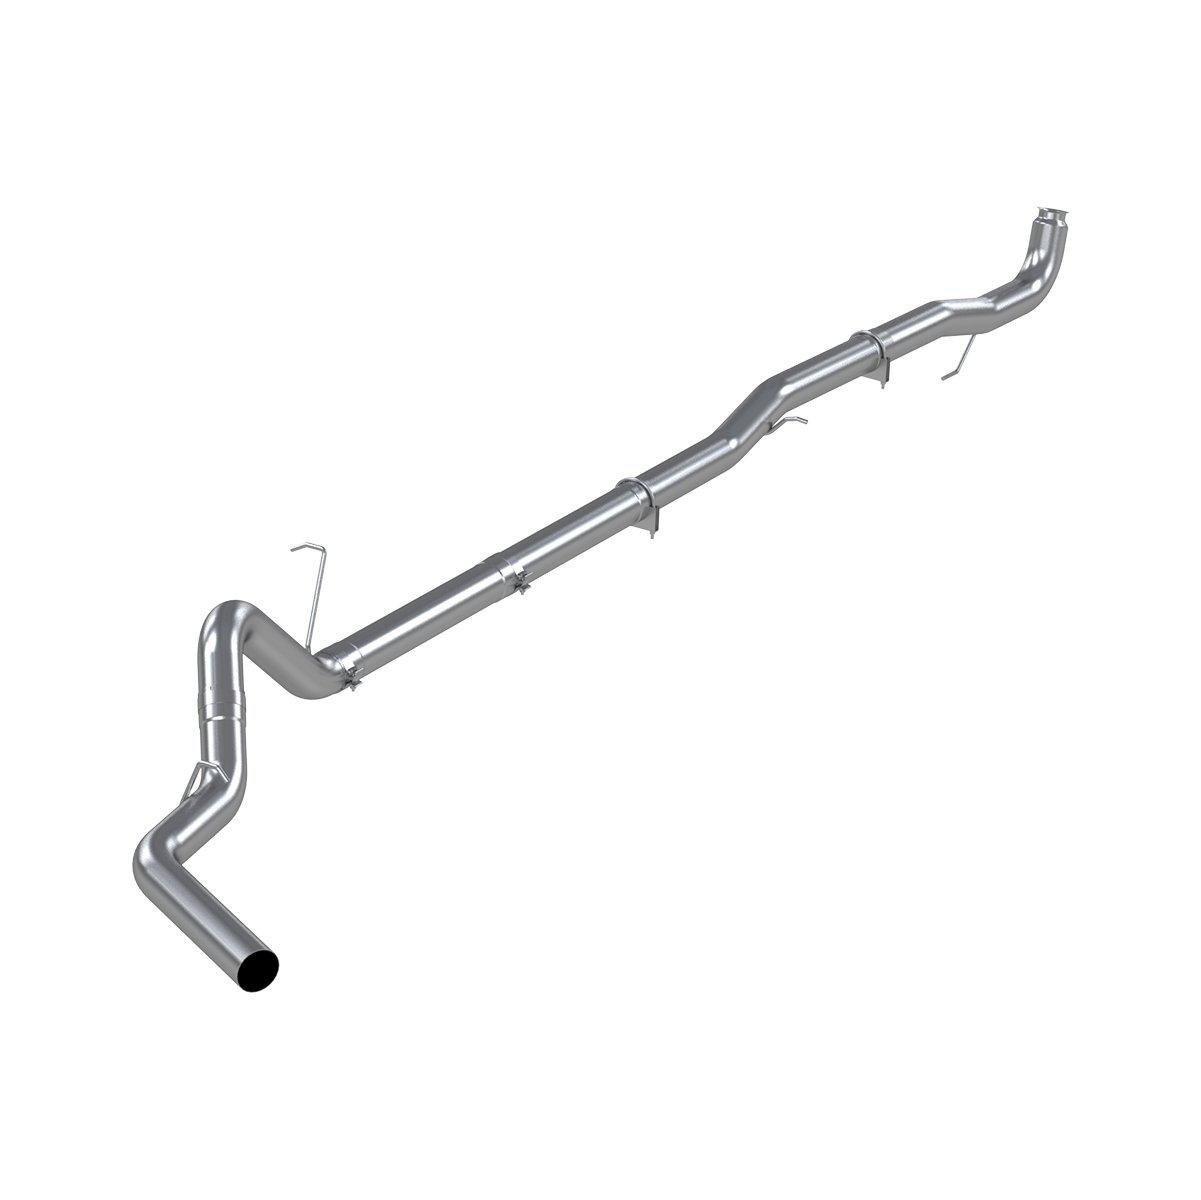 2011-2015 Duramax 4" Downpipe Back Exhaust - No Muffler (C6044PLM)-Downpipe Back Exhaust System-P1 Performance Products-C6044PLM-Dirty Diesel Customs